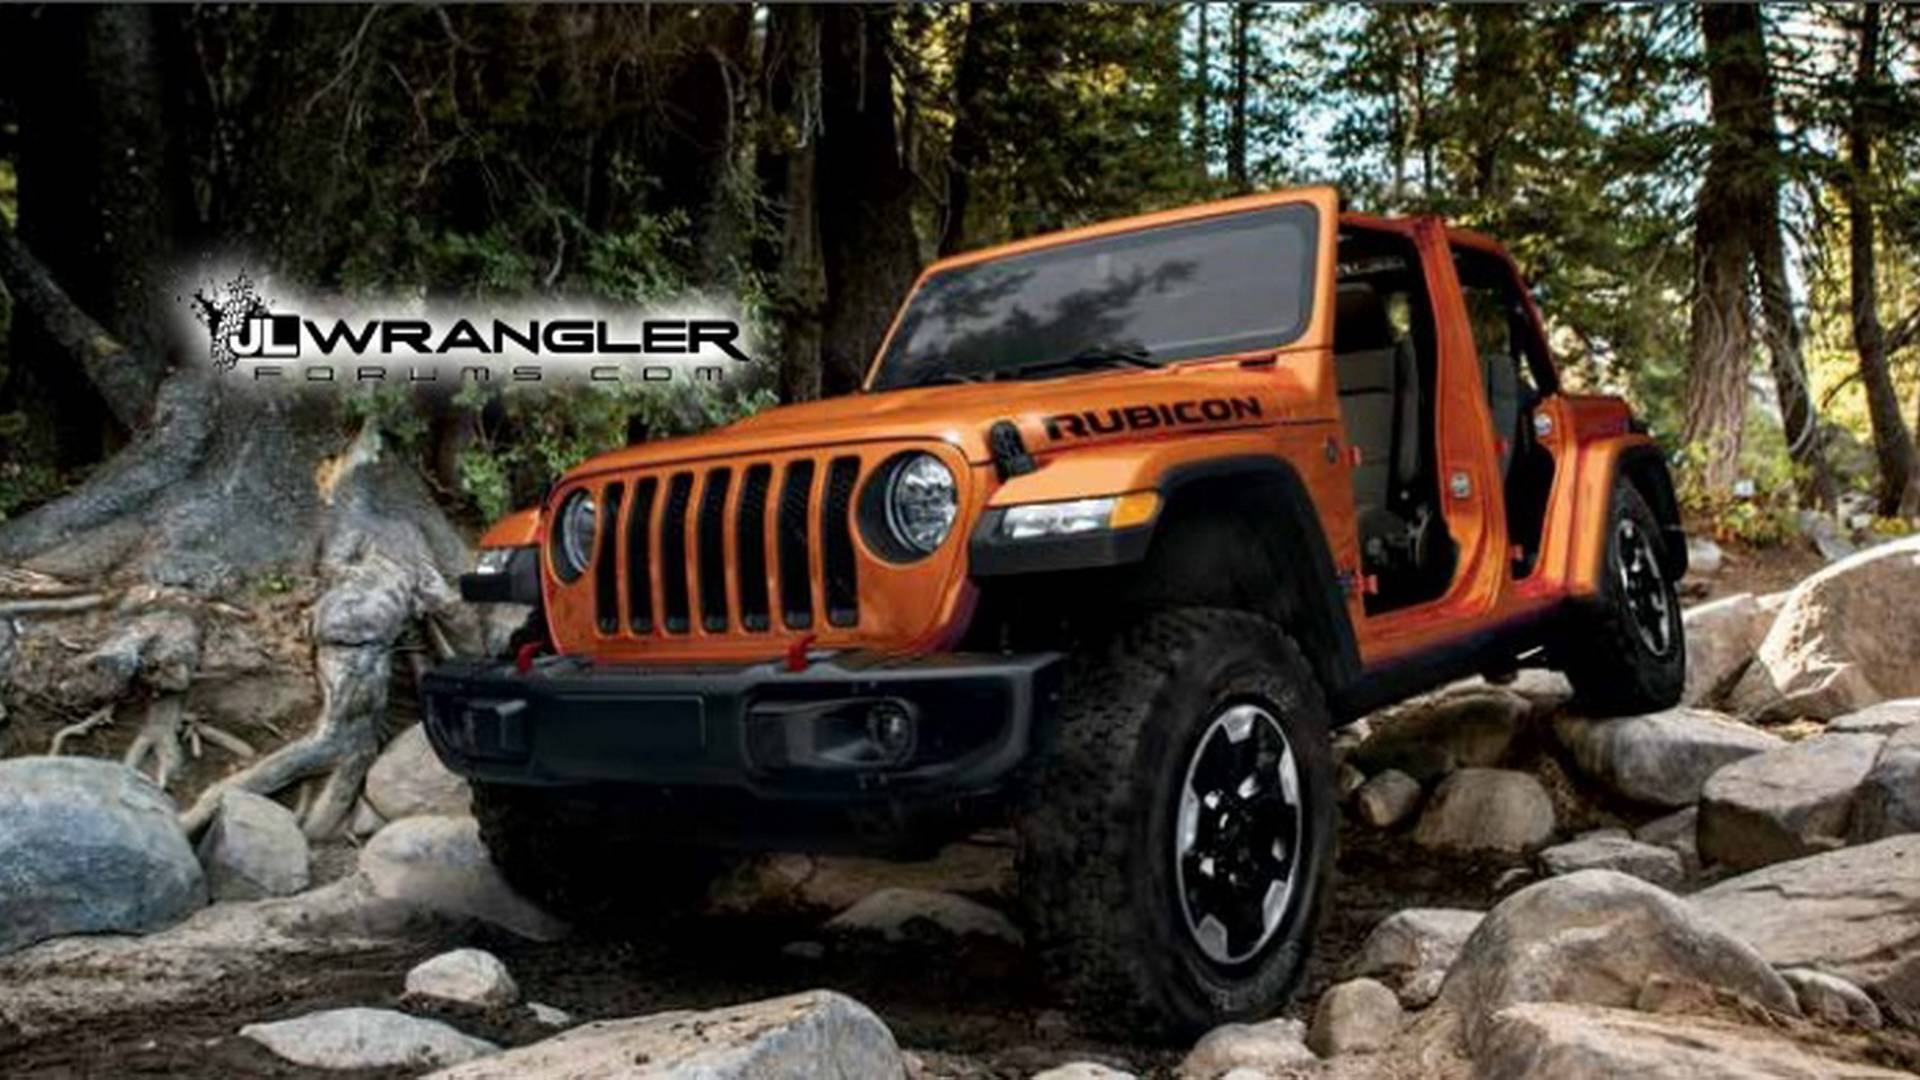 Jeep Wrangler Owner's Manual, User Guide Emerge Onto